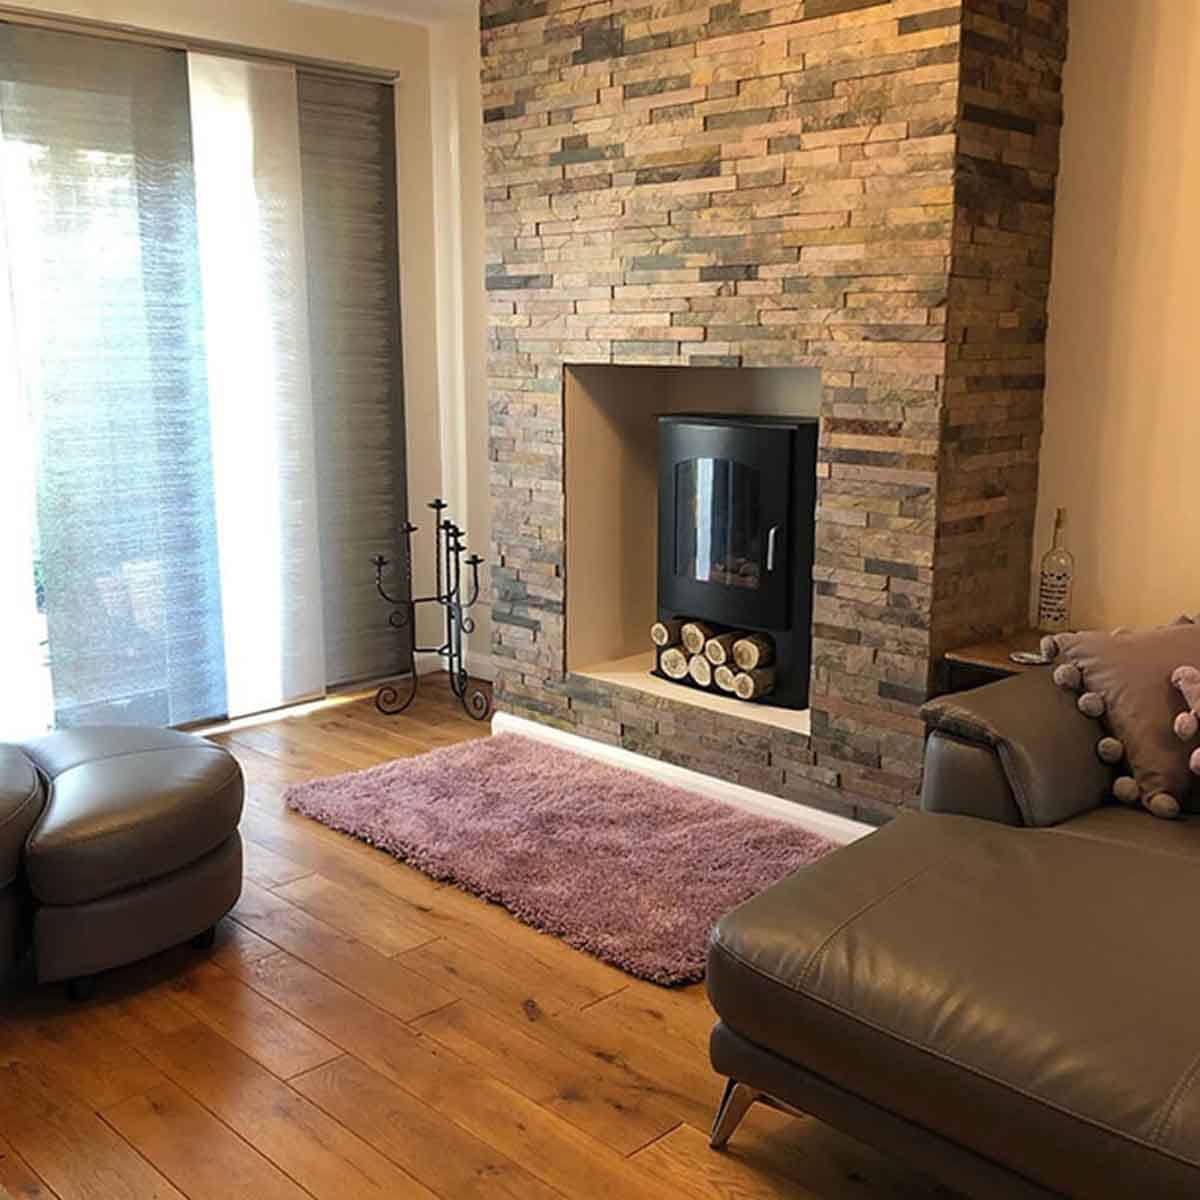 Sheera Split Face Mosaic Tiles cladded on a protruding accent wall surrounding a wood burner 